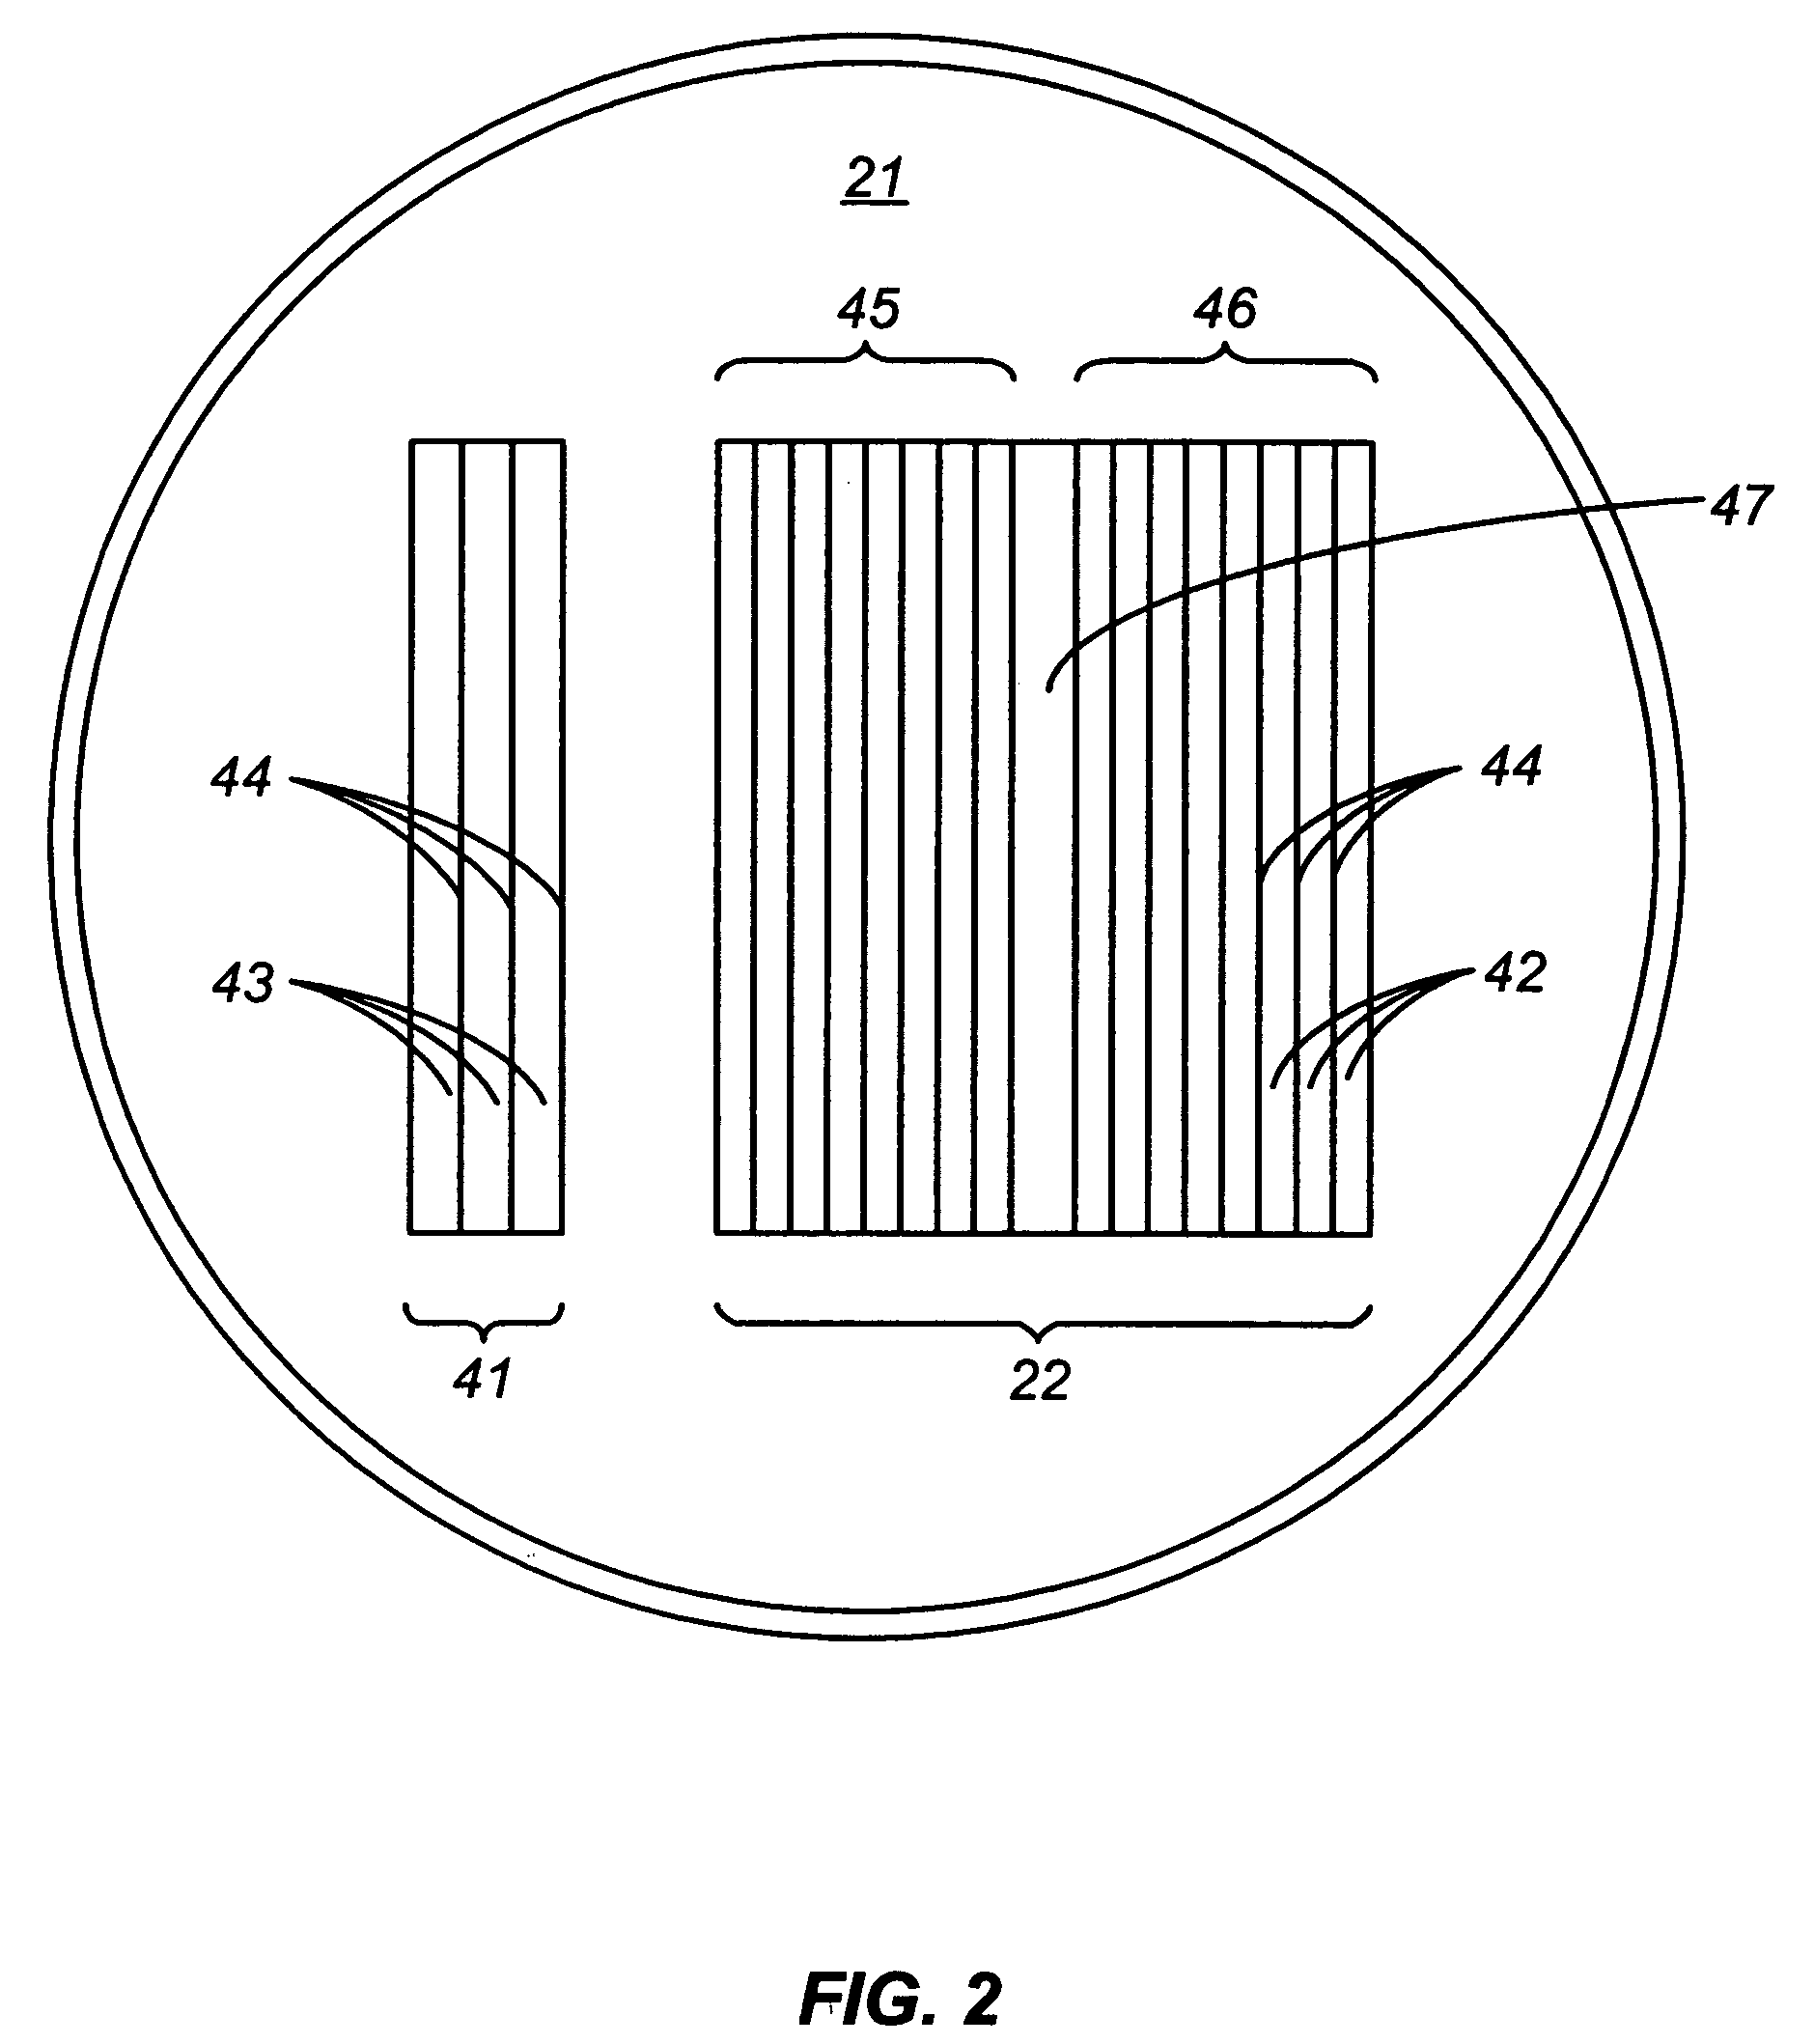 Loop-shaped ultrasound generator and use in reaction systems